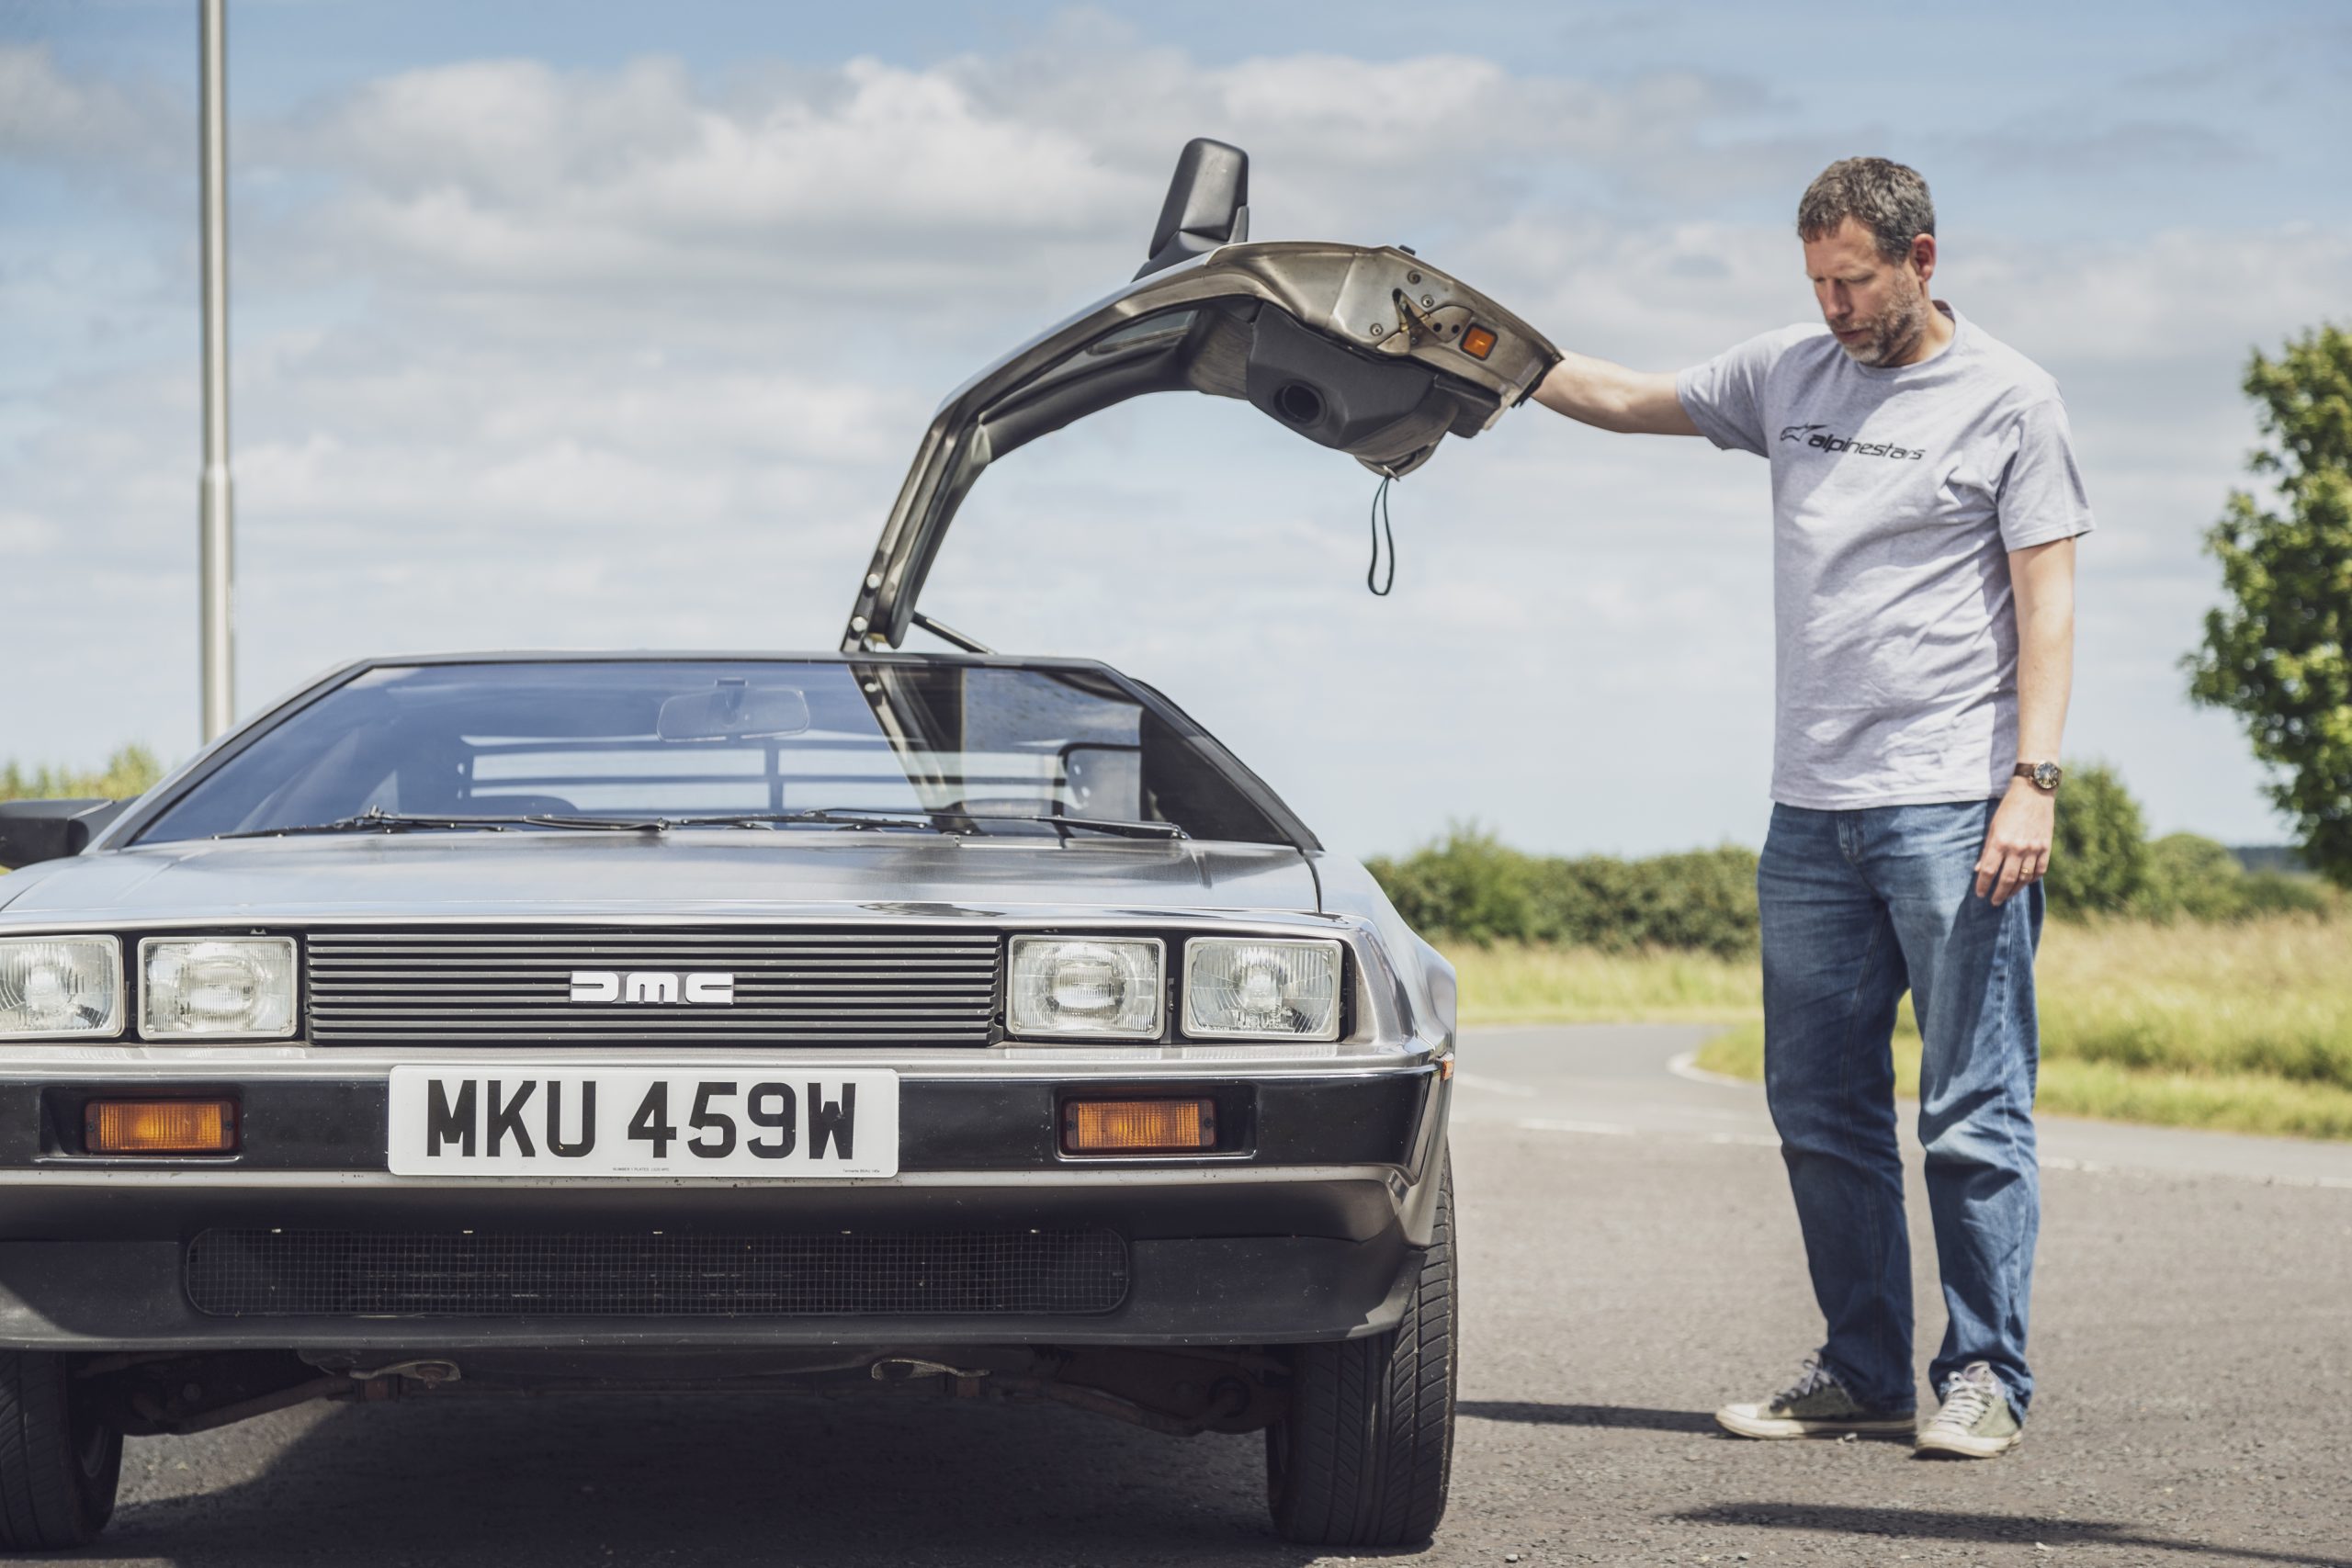 I bought a DeLorean – this is the reality of importing your dream car